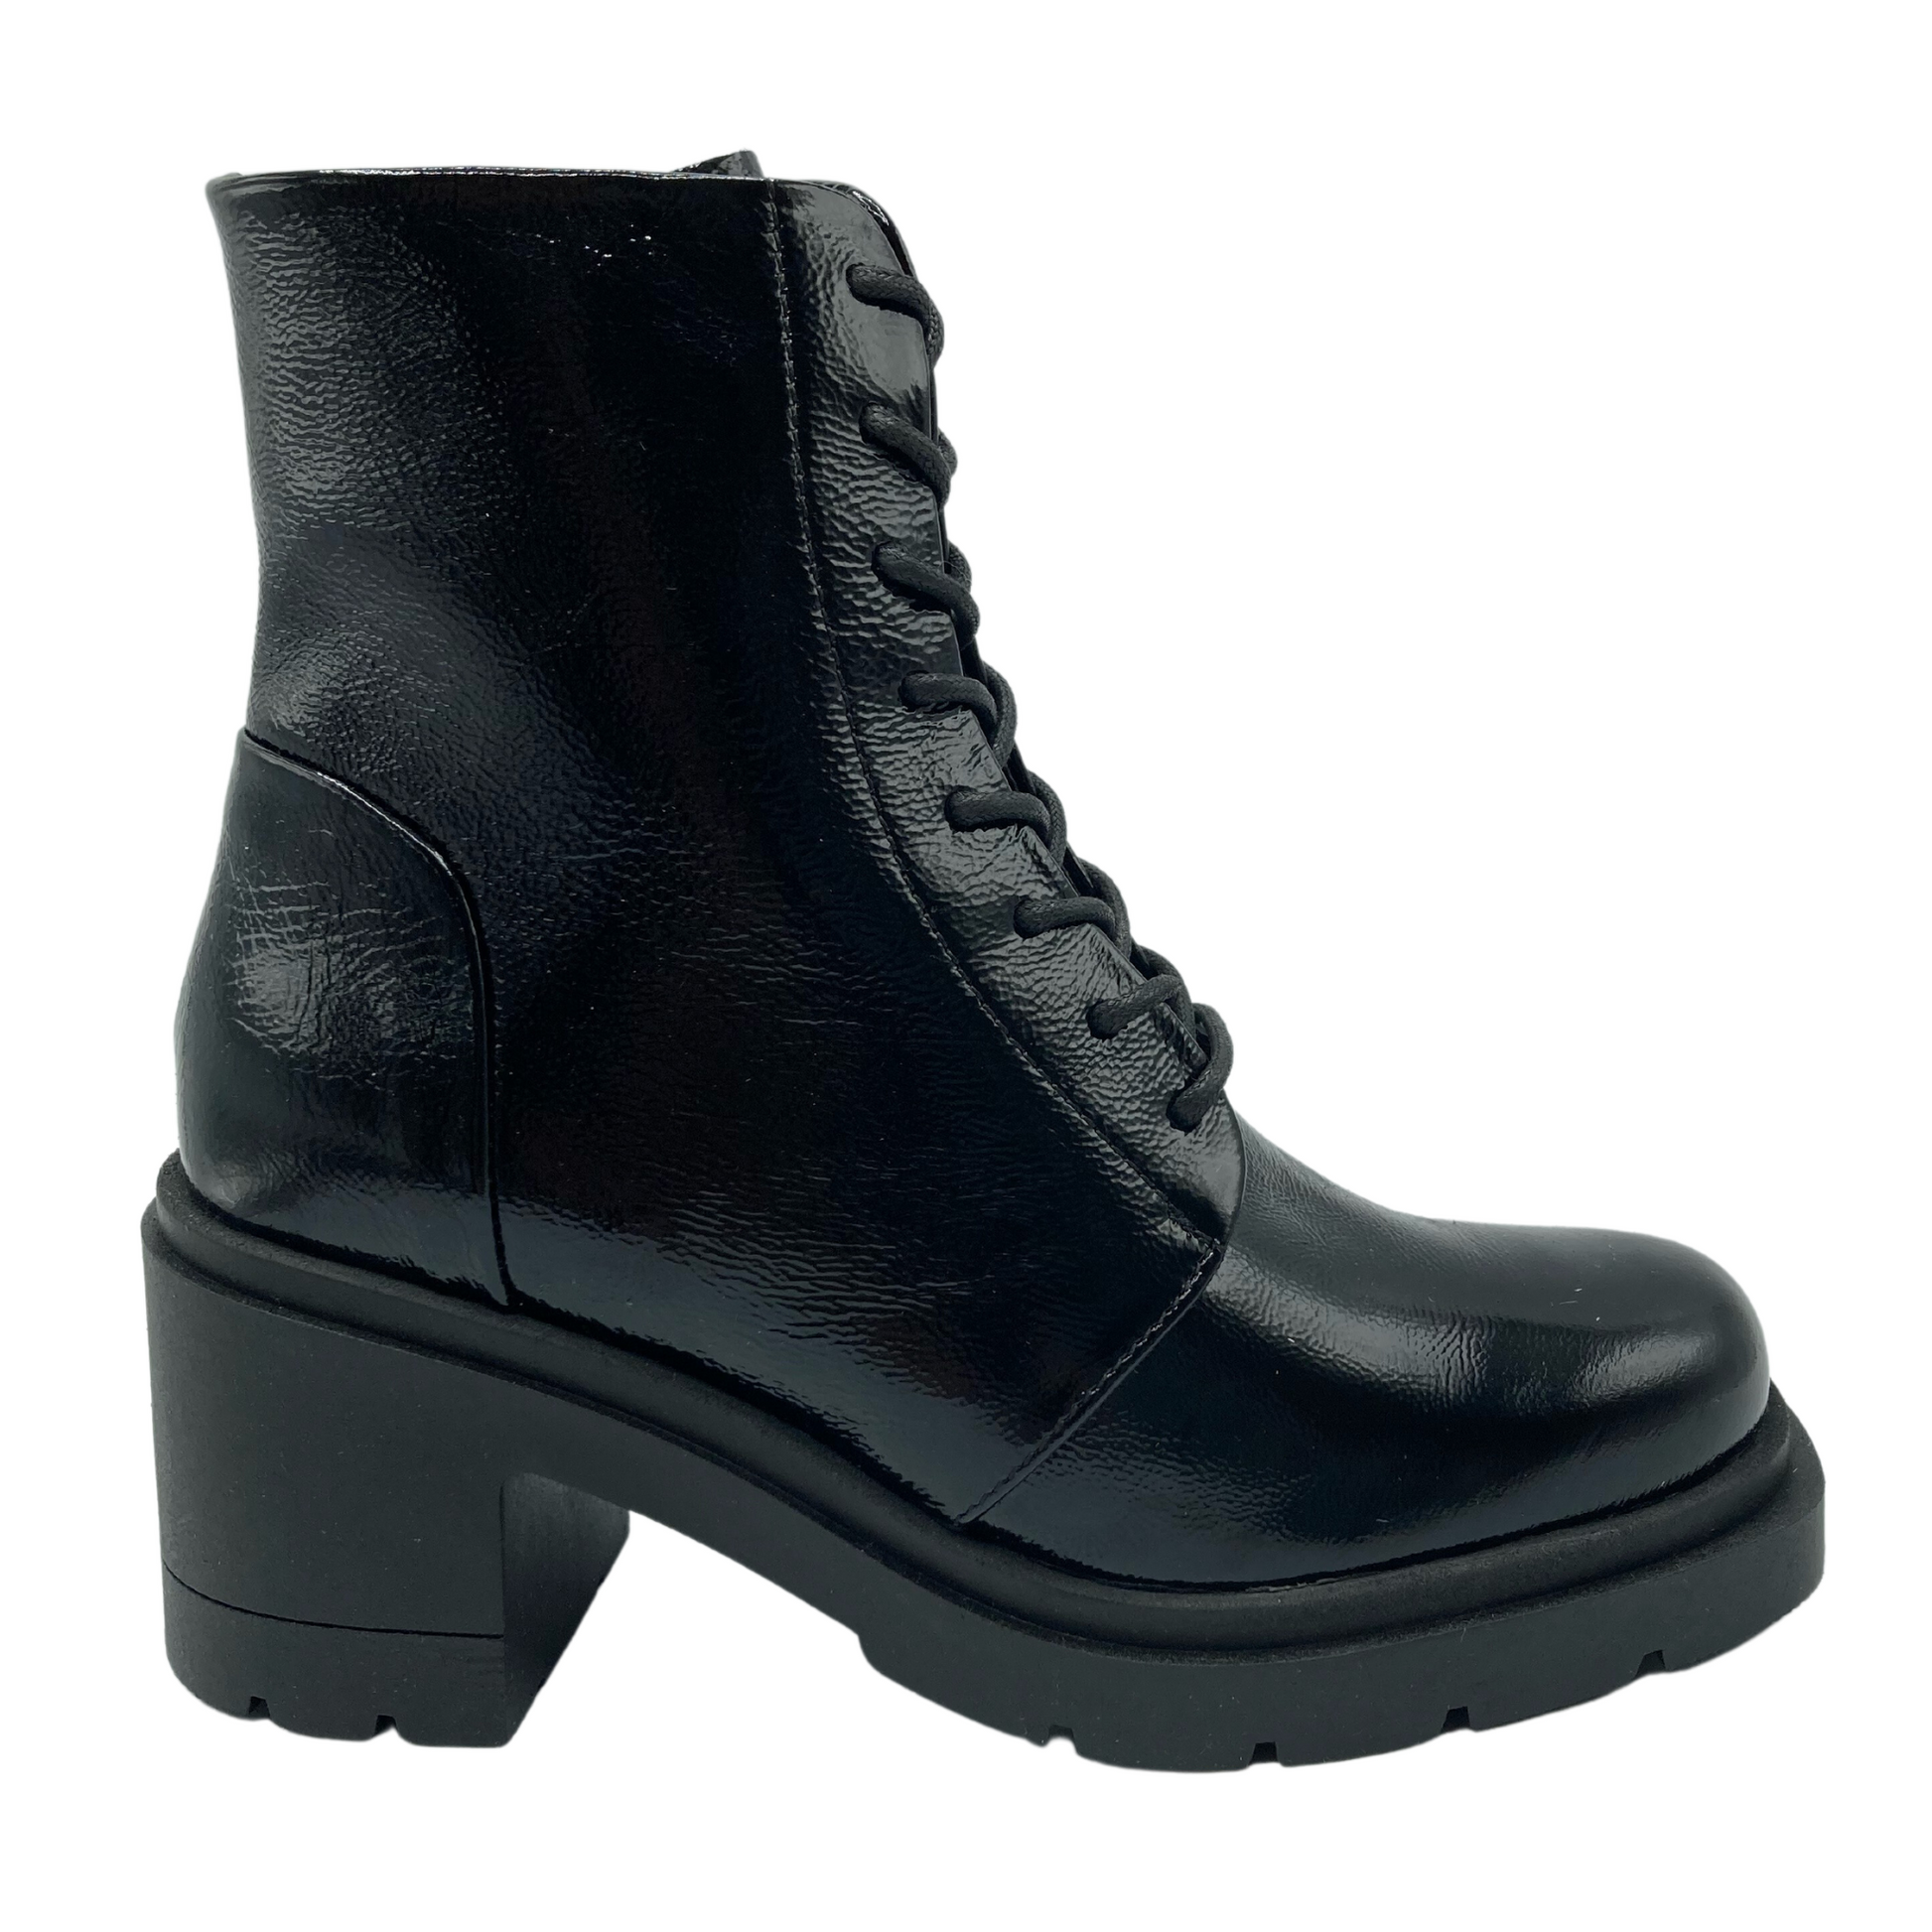 Right facing view of black patent leather boot with chunky rubber heel and matching laces